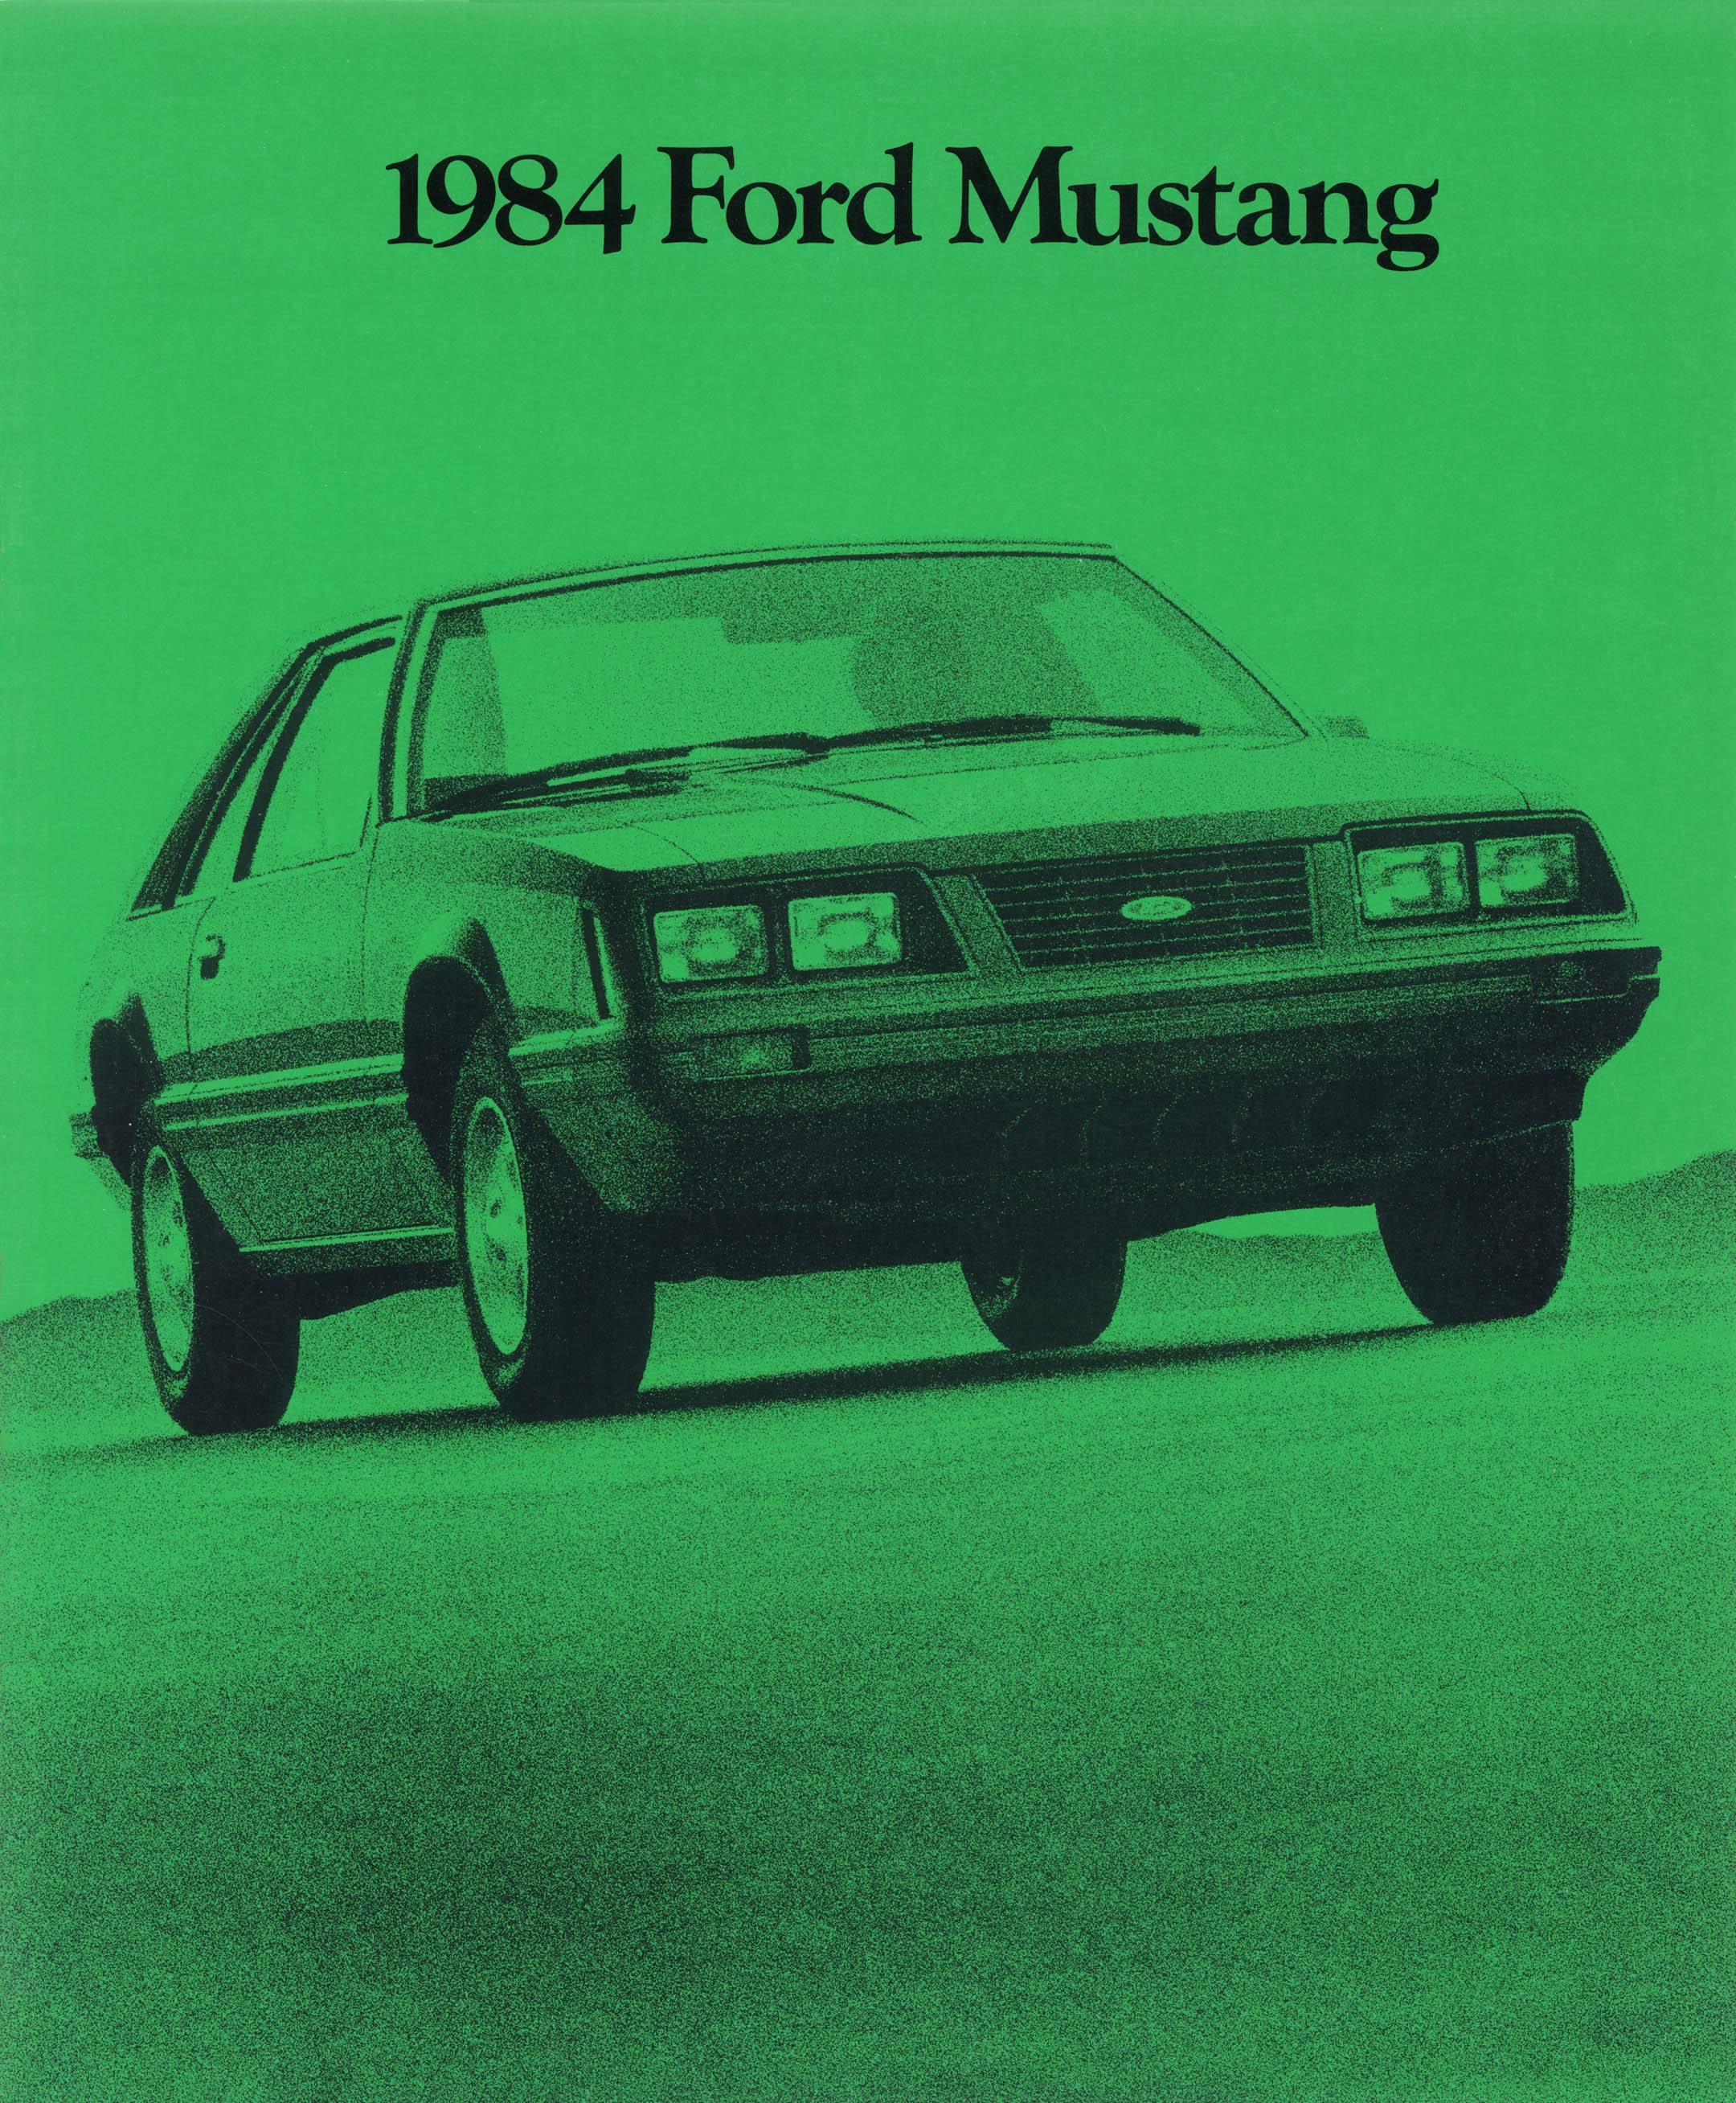 1984 Ford Mustang Brochure.